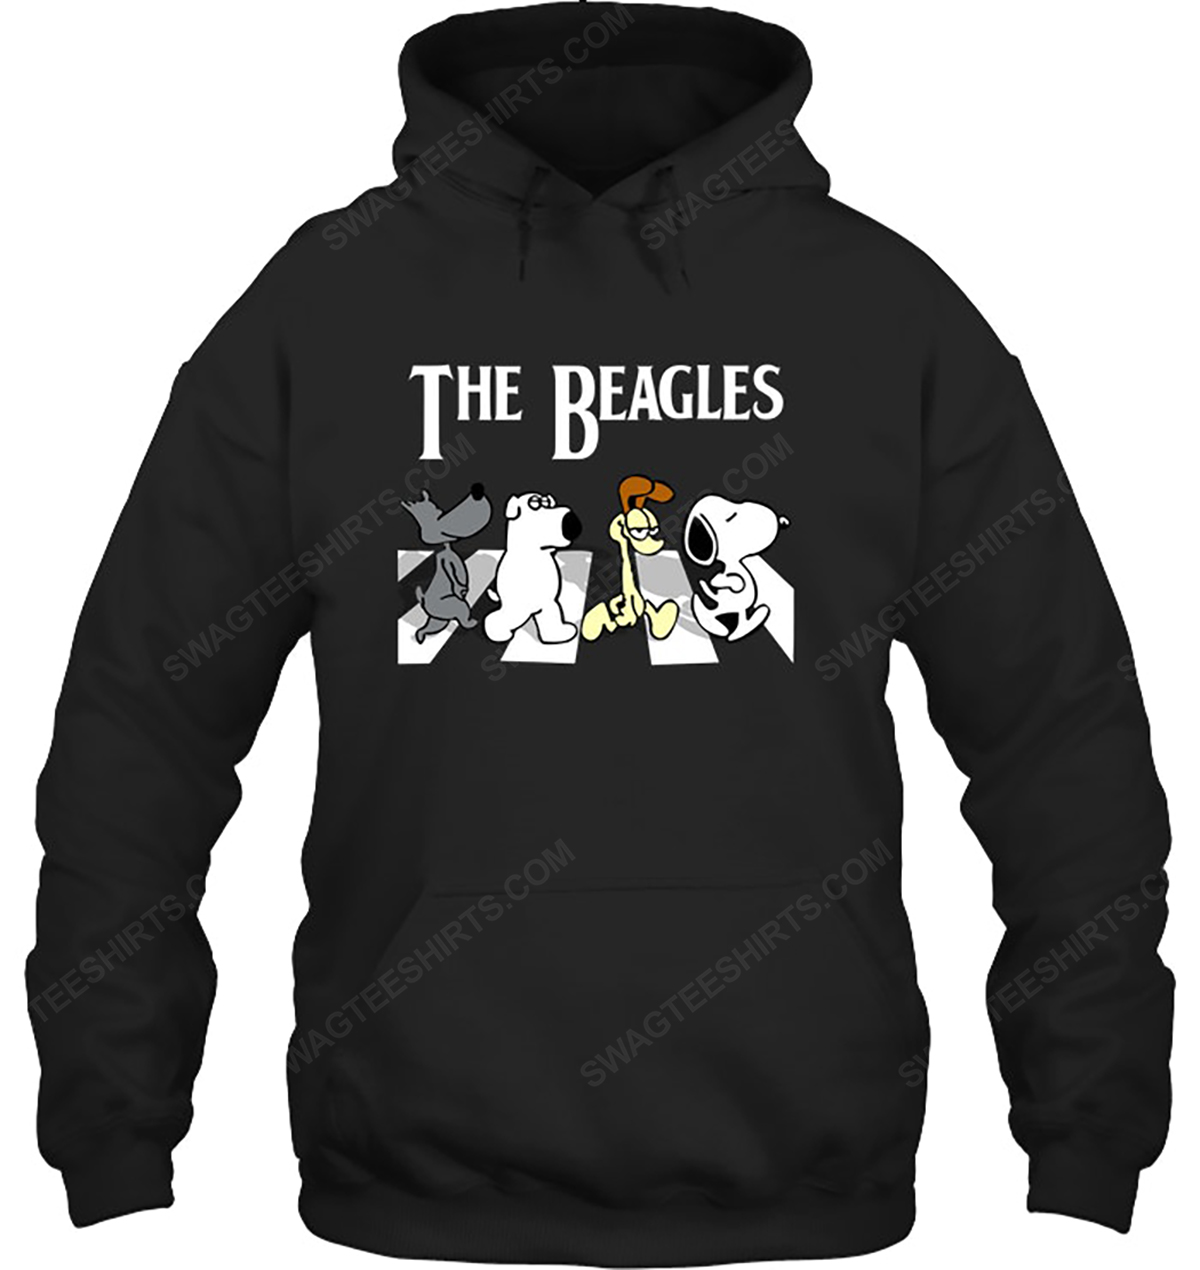 Snoopy and friends the beagles abbey road hoodie 1